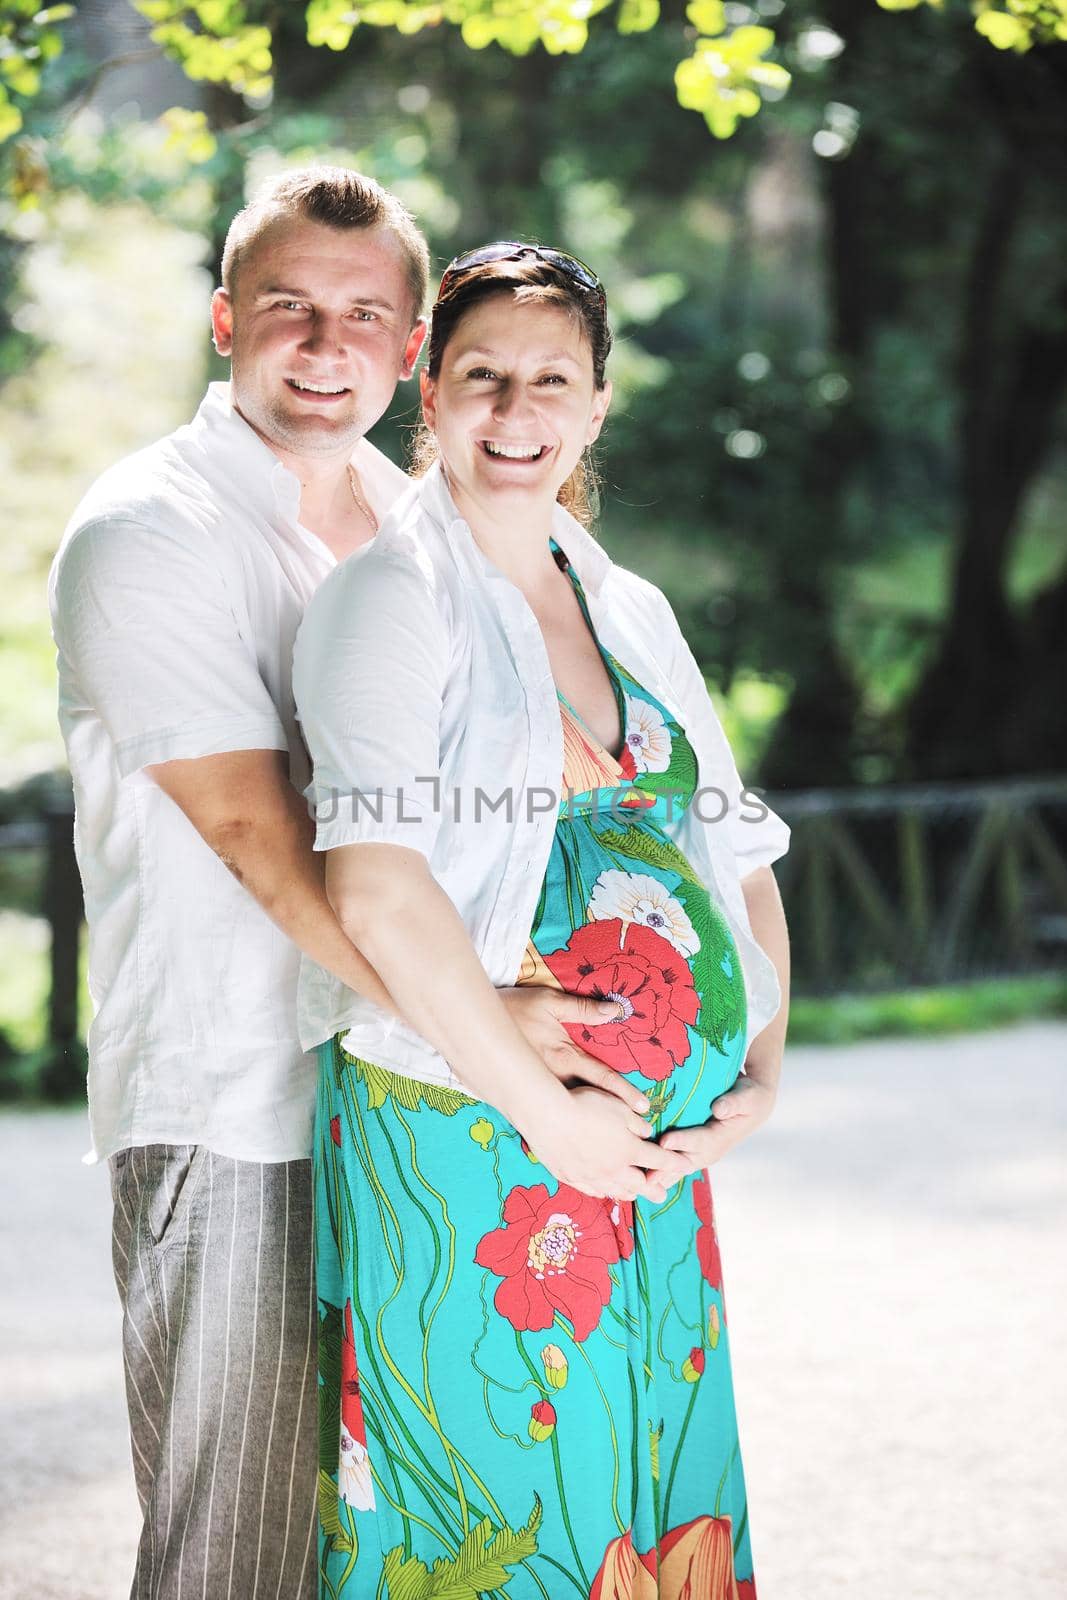 Happy pregnant couple have fun and romantic time at beautiful sunny day in park